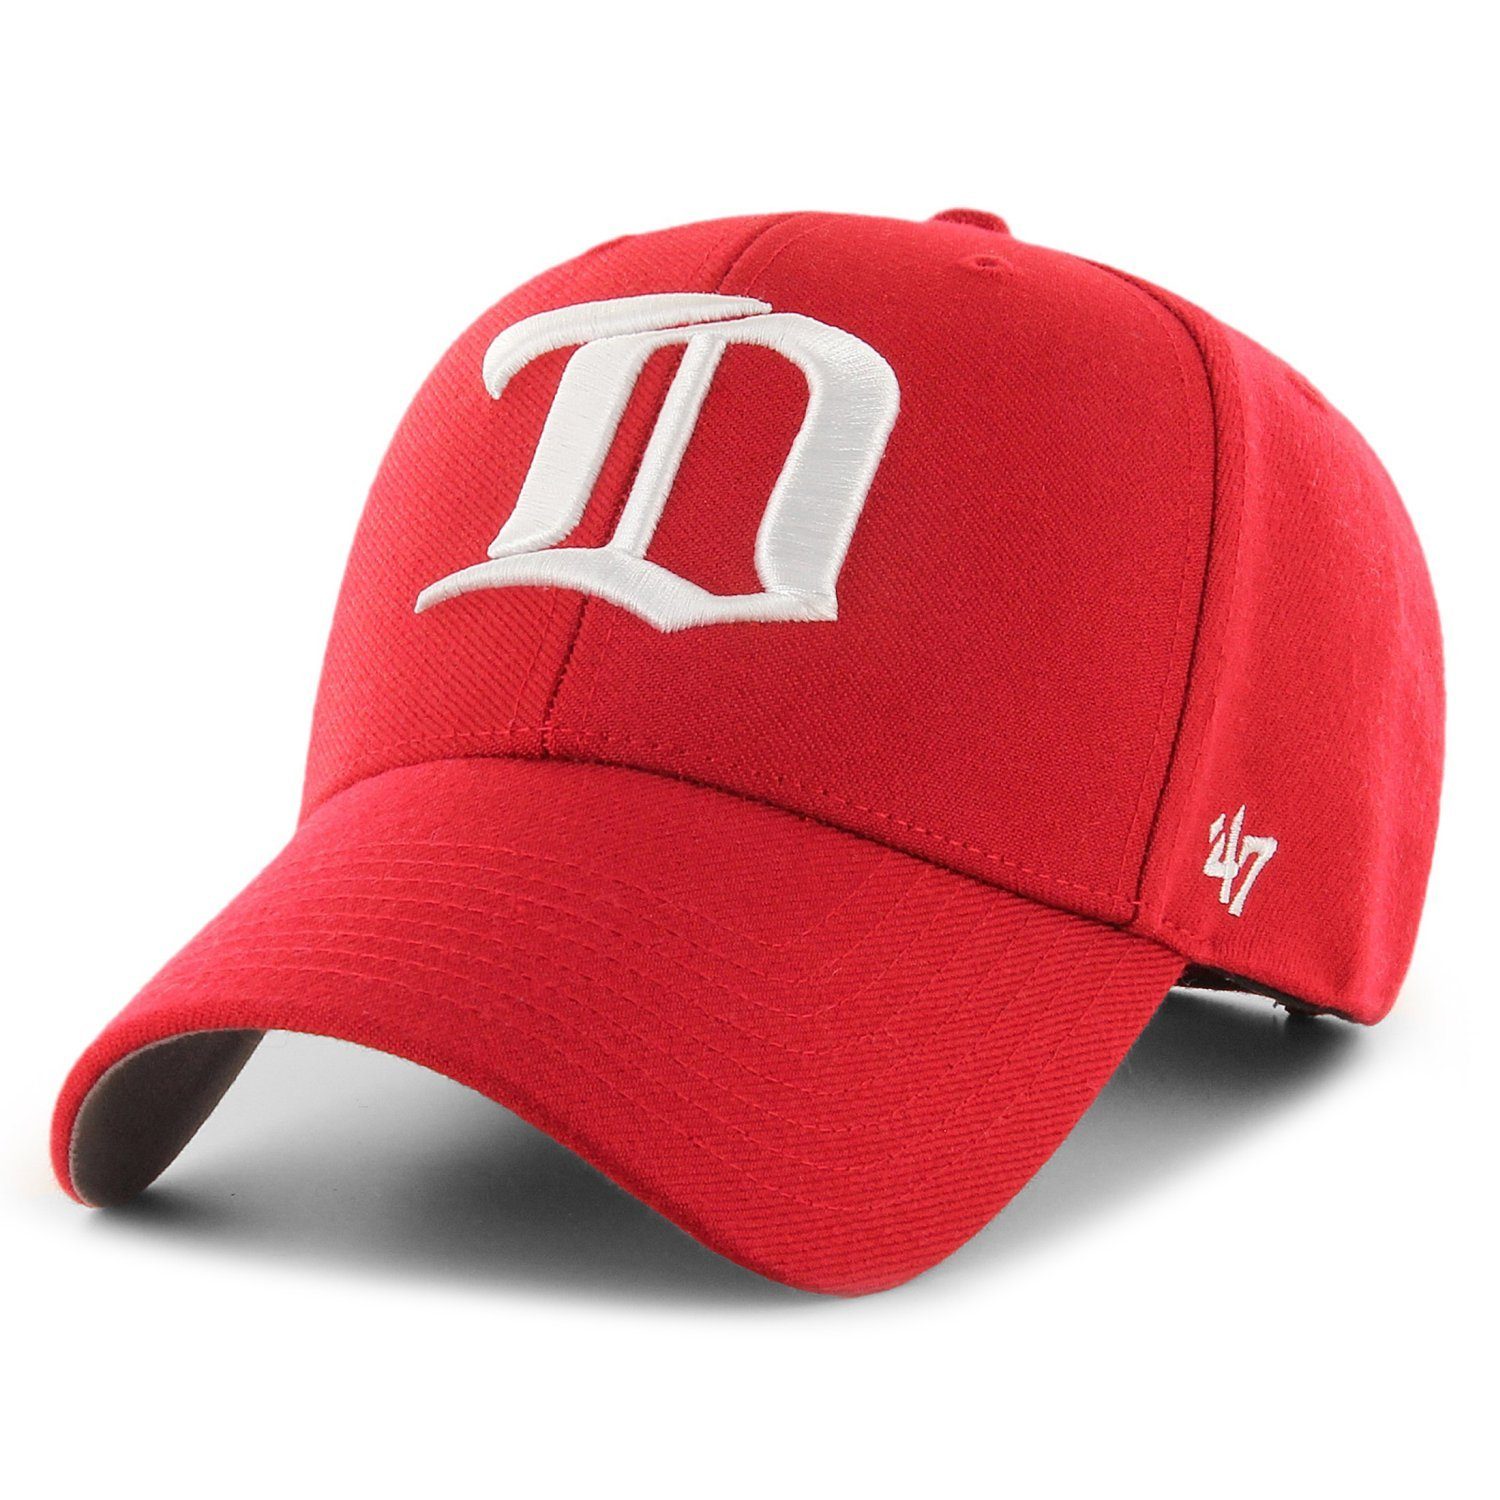 '47 Brand Trucker Cap Relaxed Fit NHL Detroit Red Wings | Trucker Caps